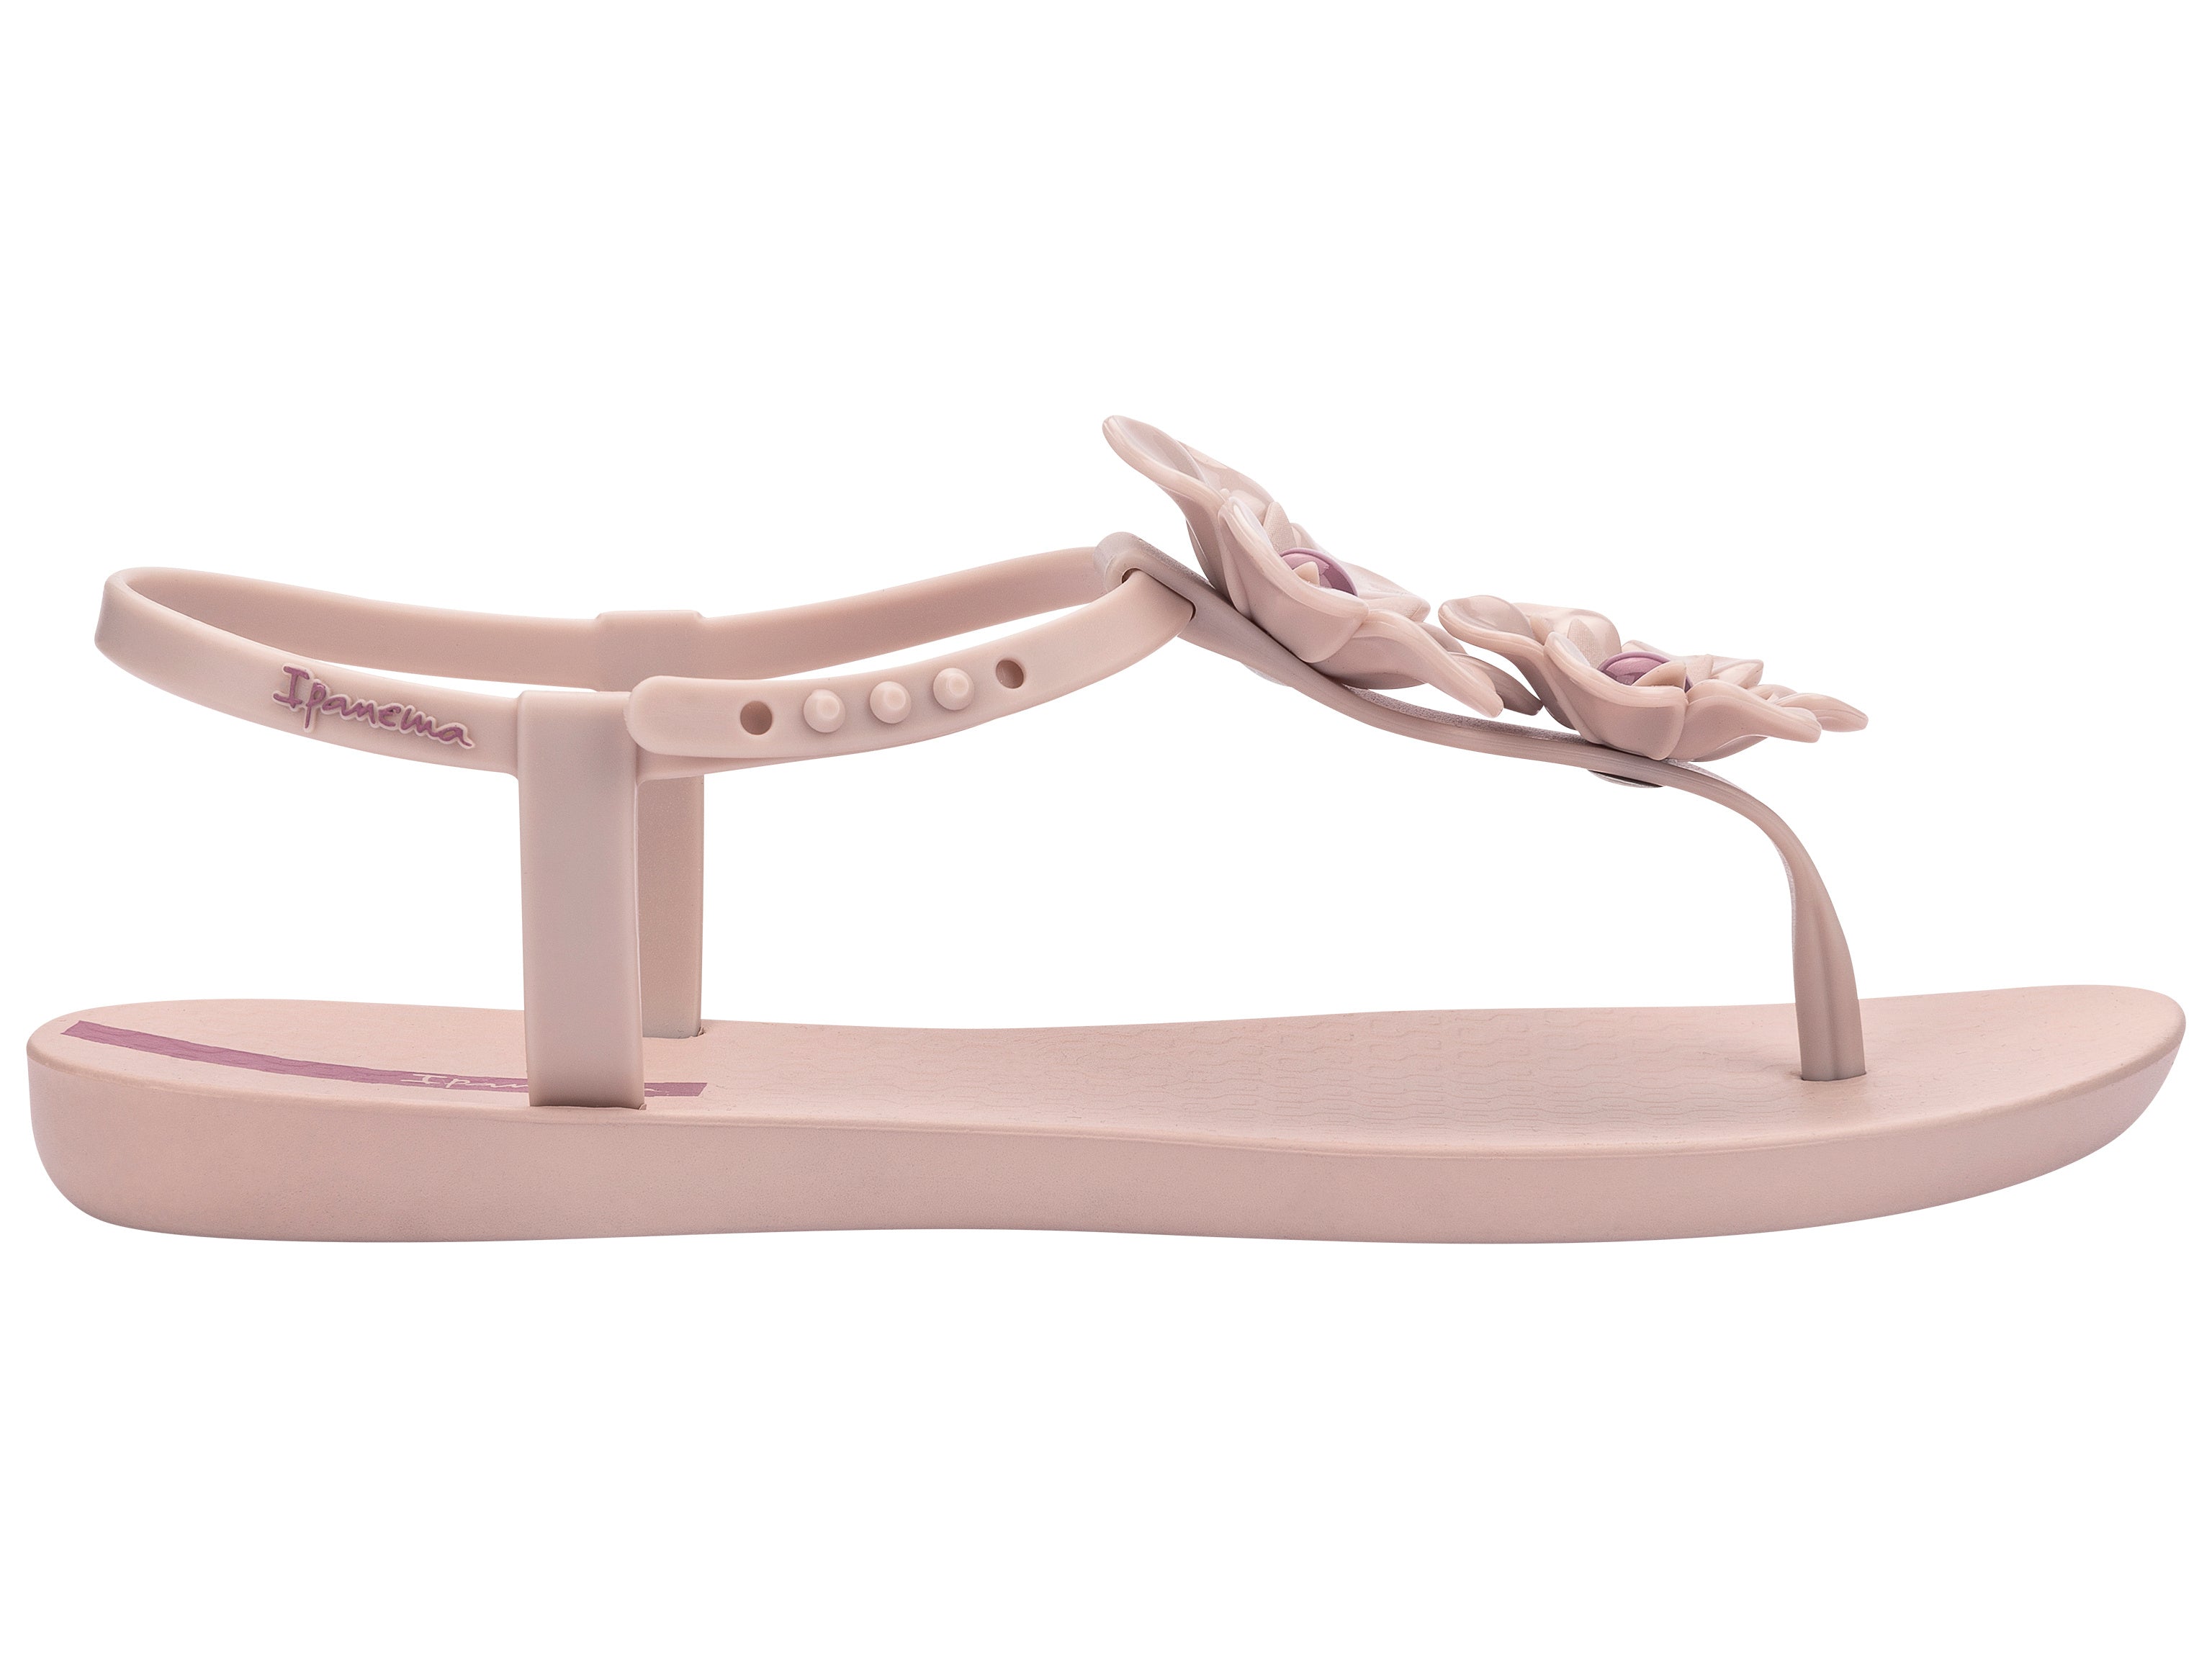 Outer side view of a pink Ipanema Duo Flowers women's t-strap sandal with two flowers.